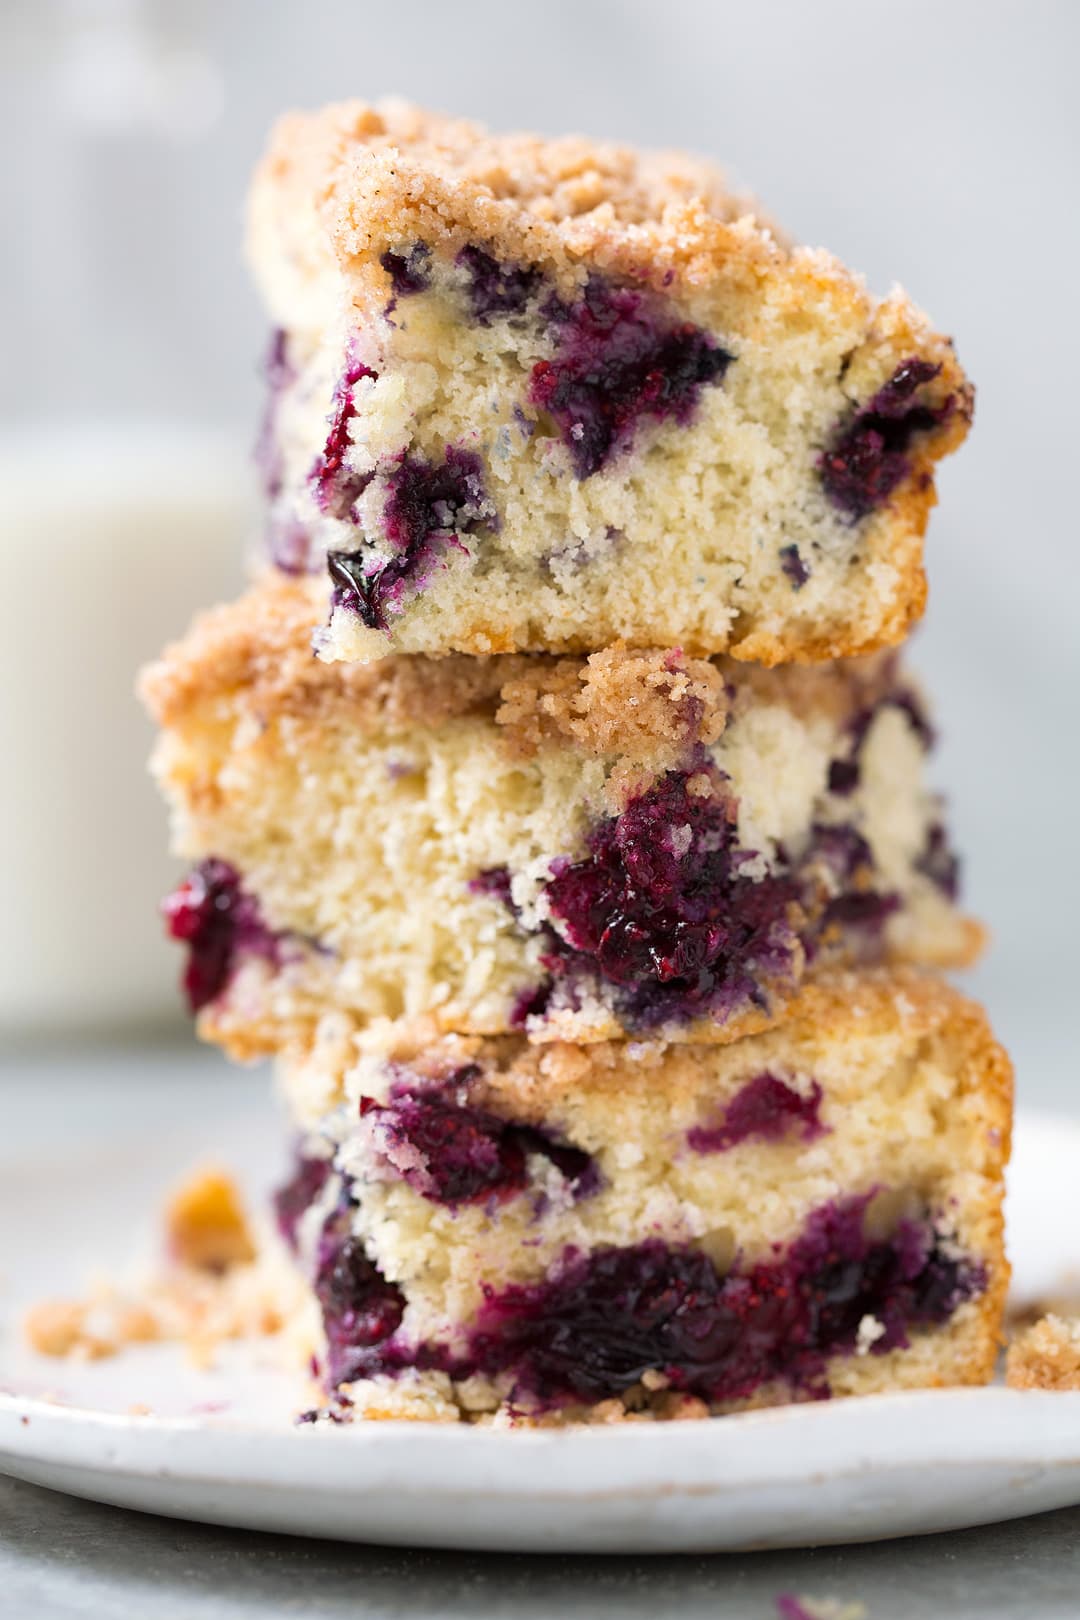 Blueberry Buckle slices stacked on top of each other